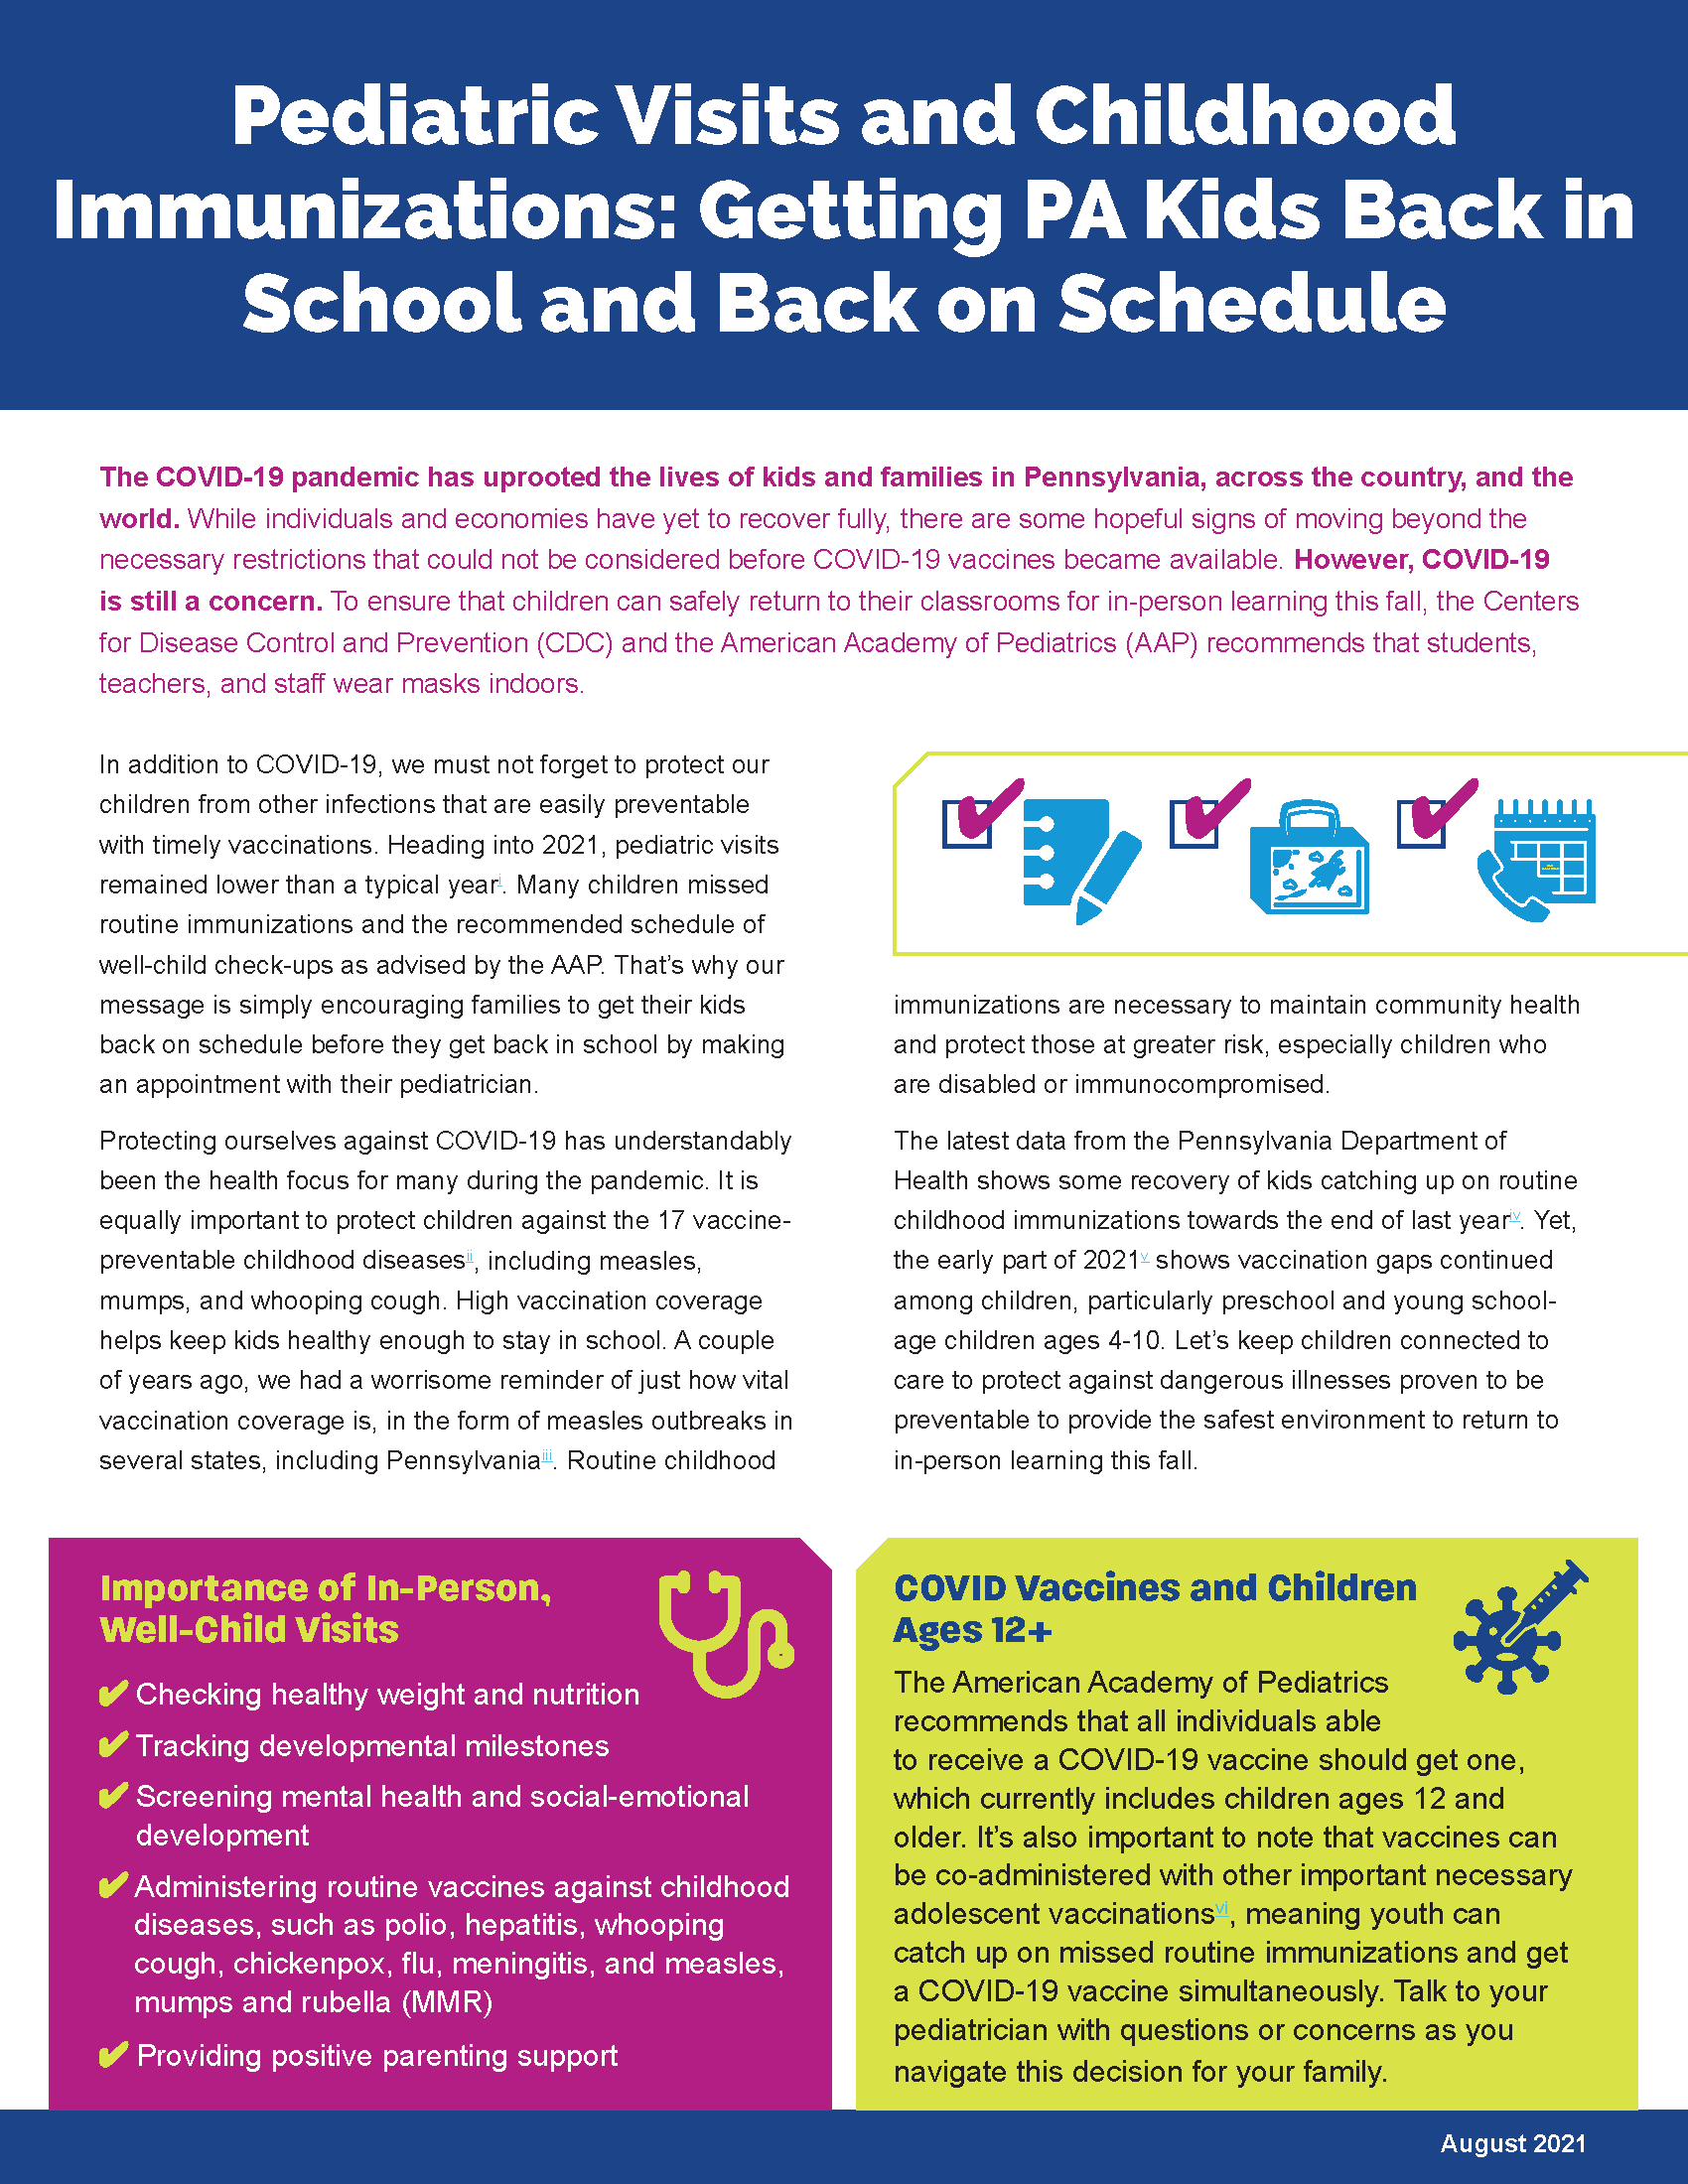 Back to School with Routine Vaccines